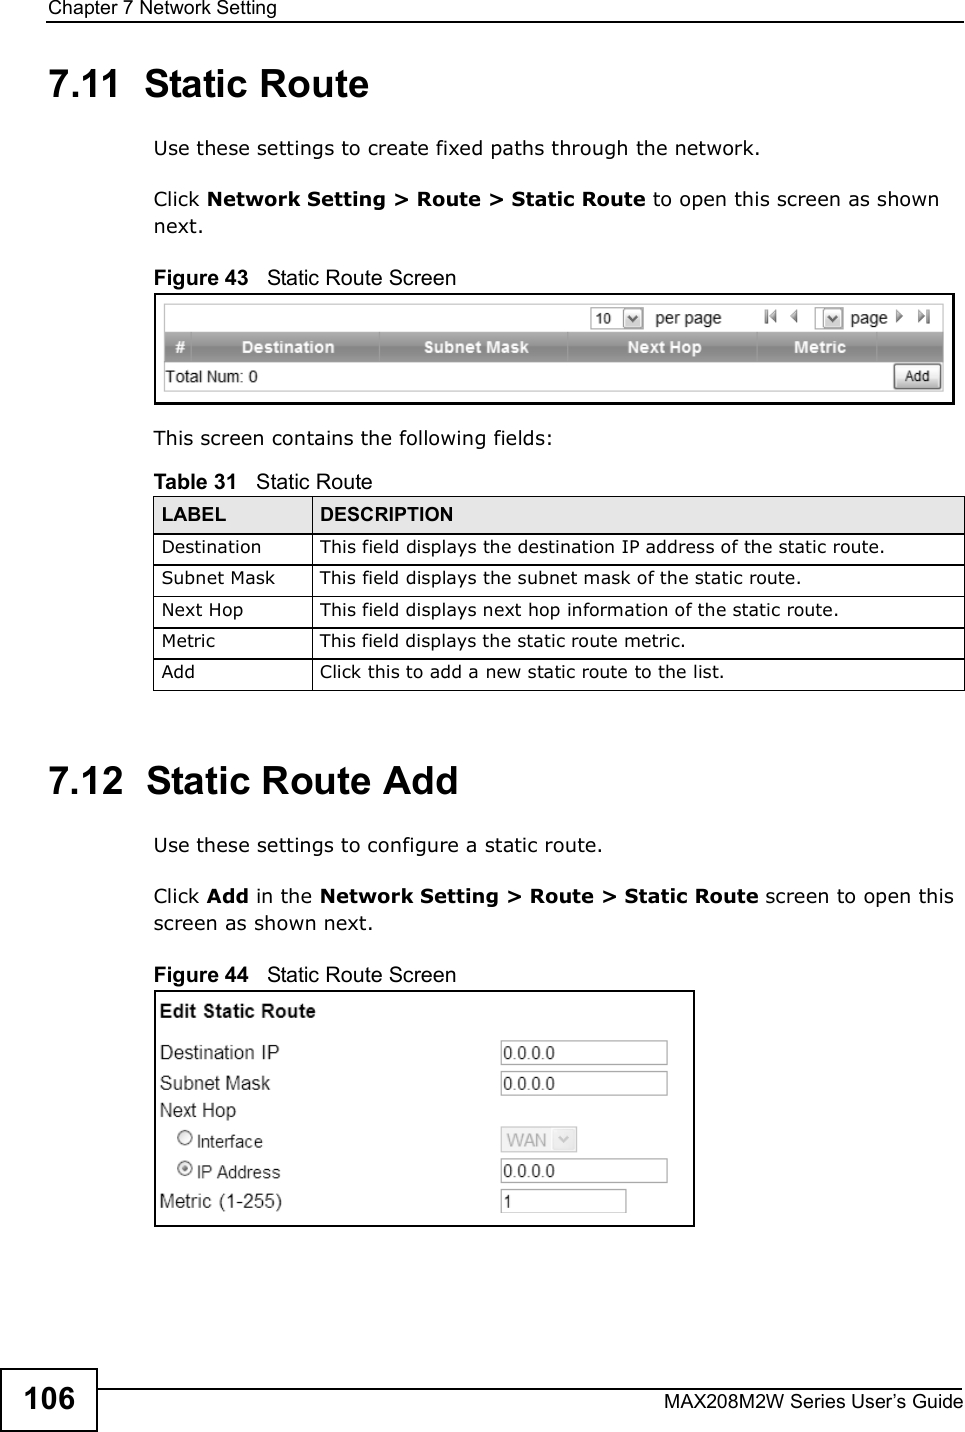 Chapter 7Network SettingMAX208M2W Series User s Guide1067.11  Static RouteUse these settings to create fixed paths through the network.Click Network Setting &gt; Route &gt; Static Route to open this screen as shown next.Figure 43   Static Route ScreenThis screen contains the following fields:7.12  Static Route AddUse these settings to configure a static route.Click Add in the Network Setting &gt; Route &gt; Static Route screen to open this screen as shown next.Figure 44   Static Route ScreenTable 31   Static RouteLABEL DESCRIPTIONDestinationThis field displays the destination IP address of the static route.Subnet MaskThis field displays the subnet mask of the static route.Next HopThis field displays next hop information of the static route.MetricThis field displays the static route metric.AddClick this to add a new static route to the list.